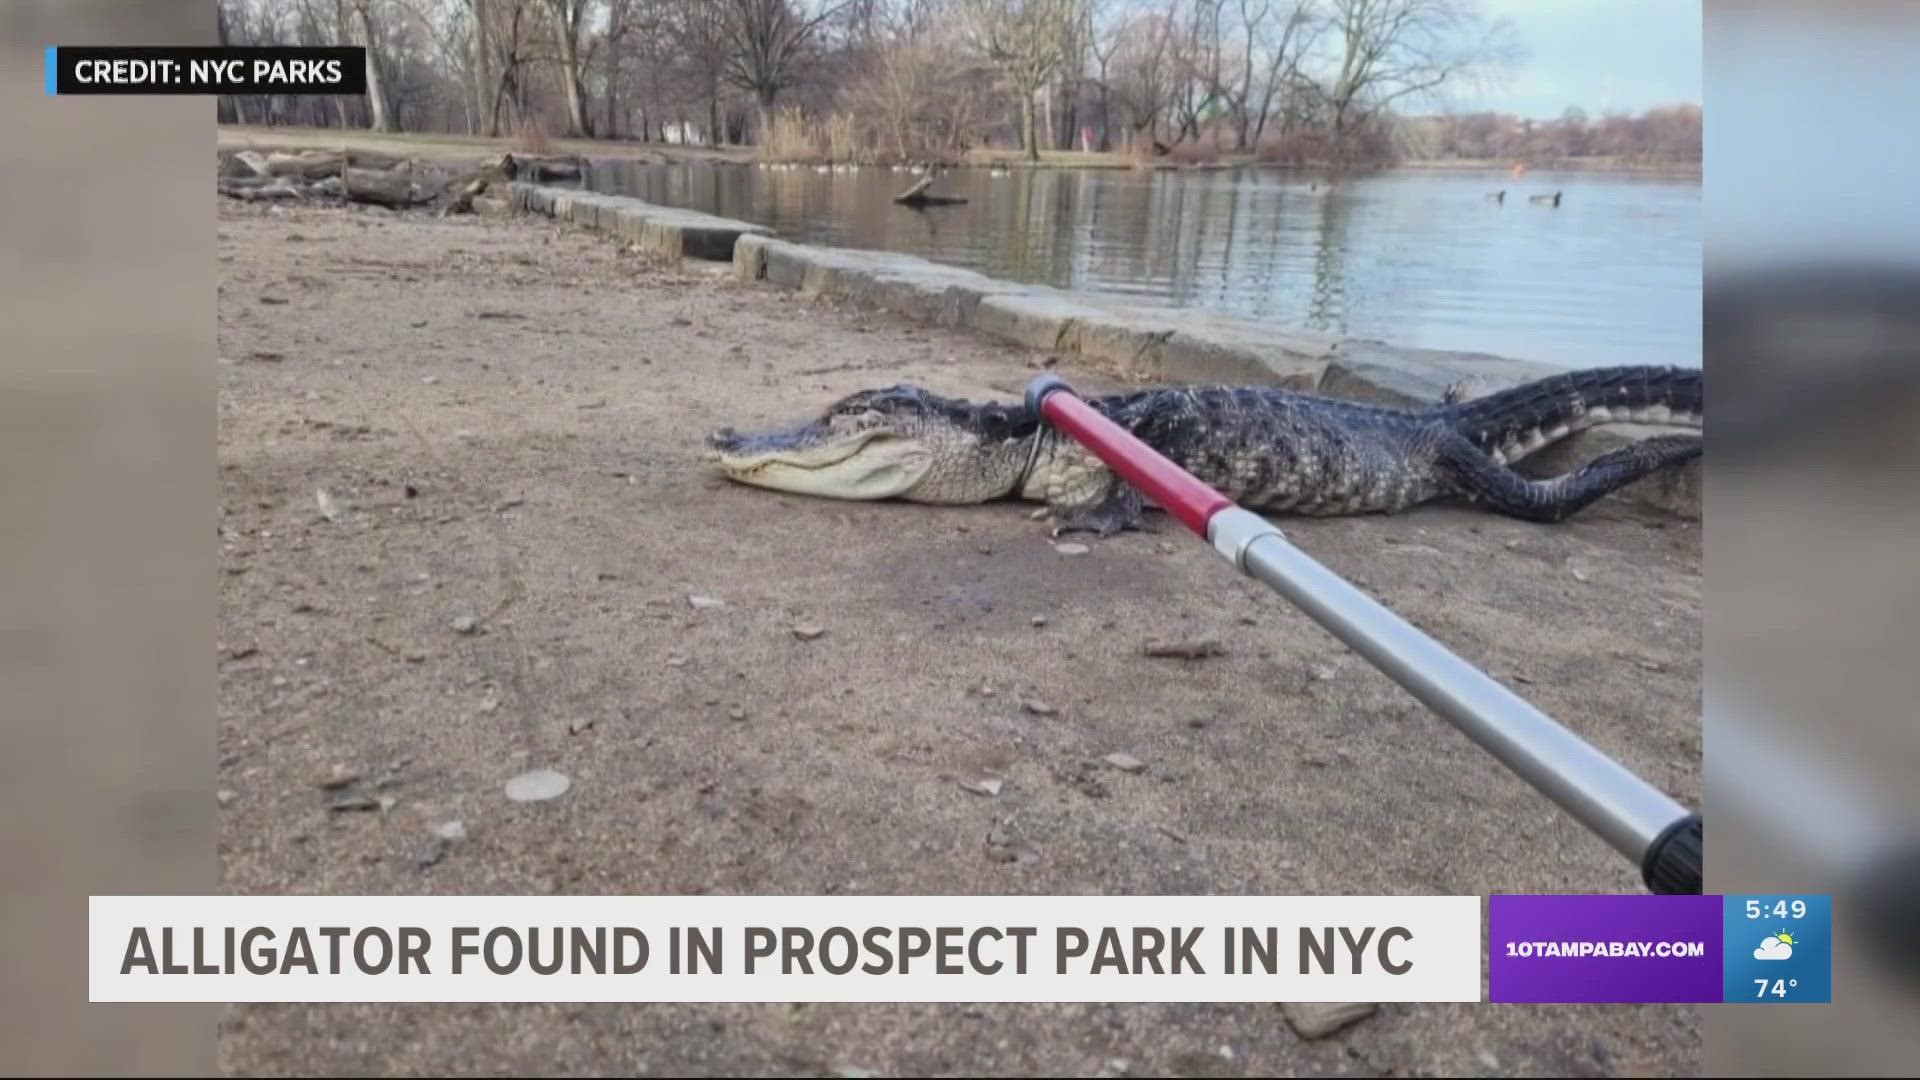 The gator was found "very lethargic and possibly cold-shocked" and was taken to the Bronx Zoo for rehabilitation.